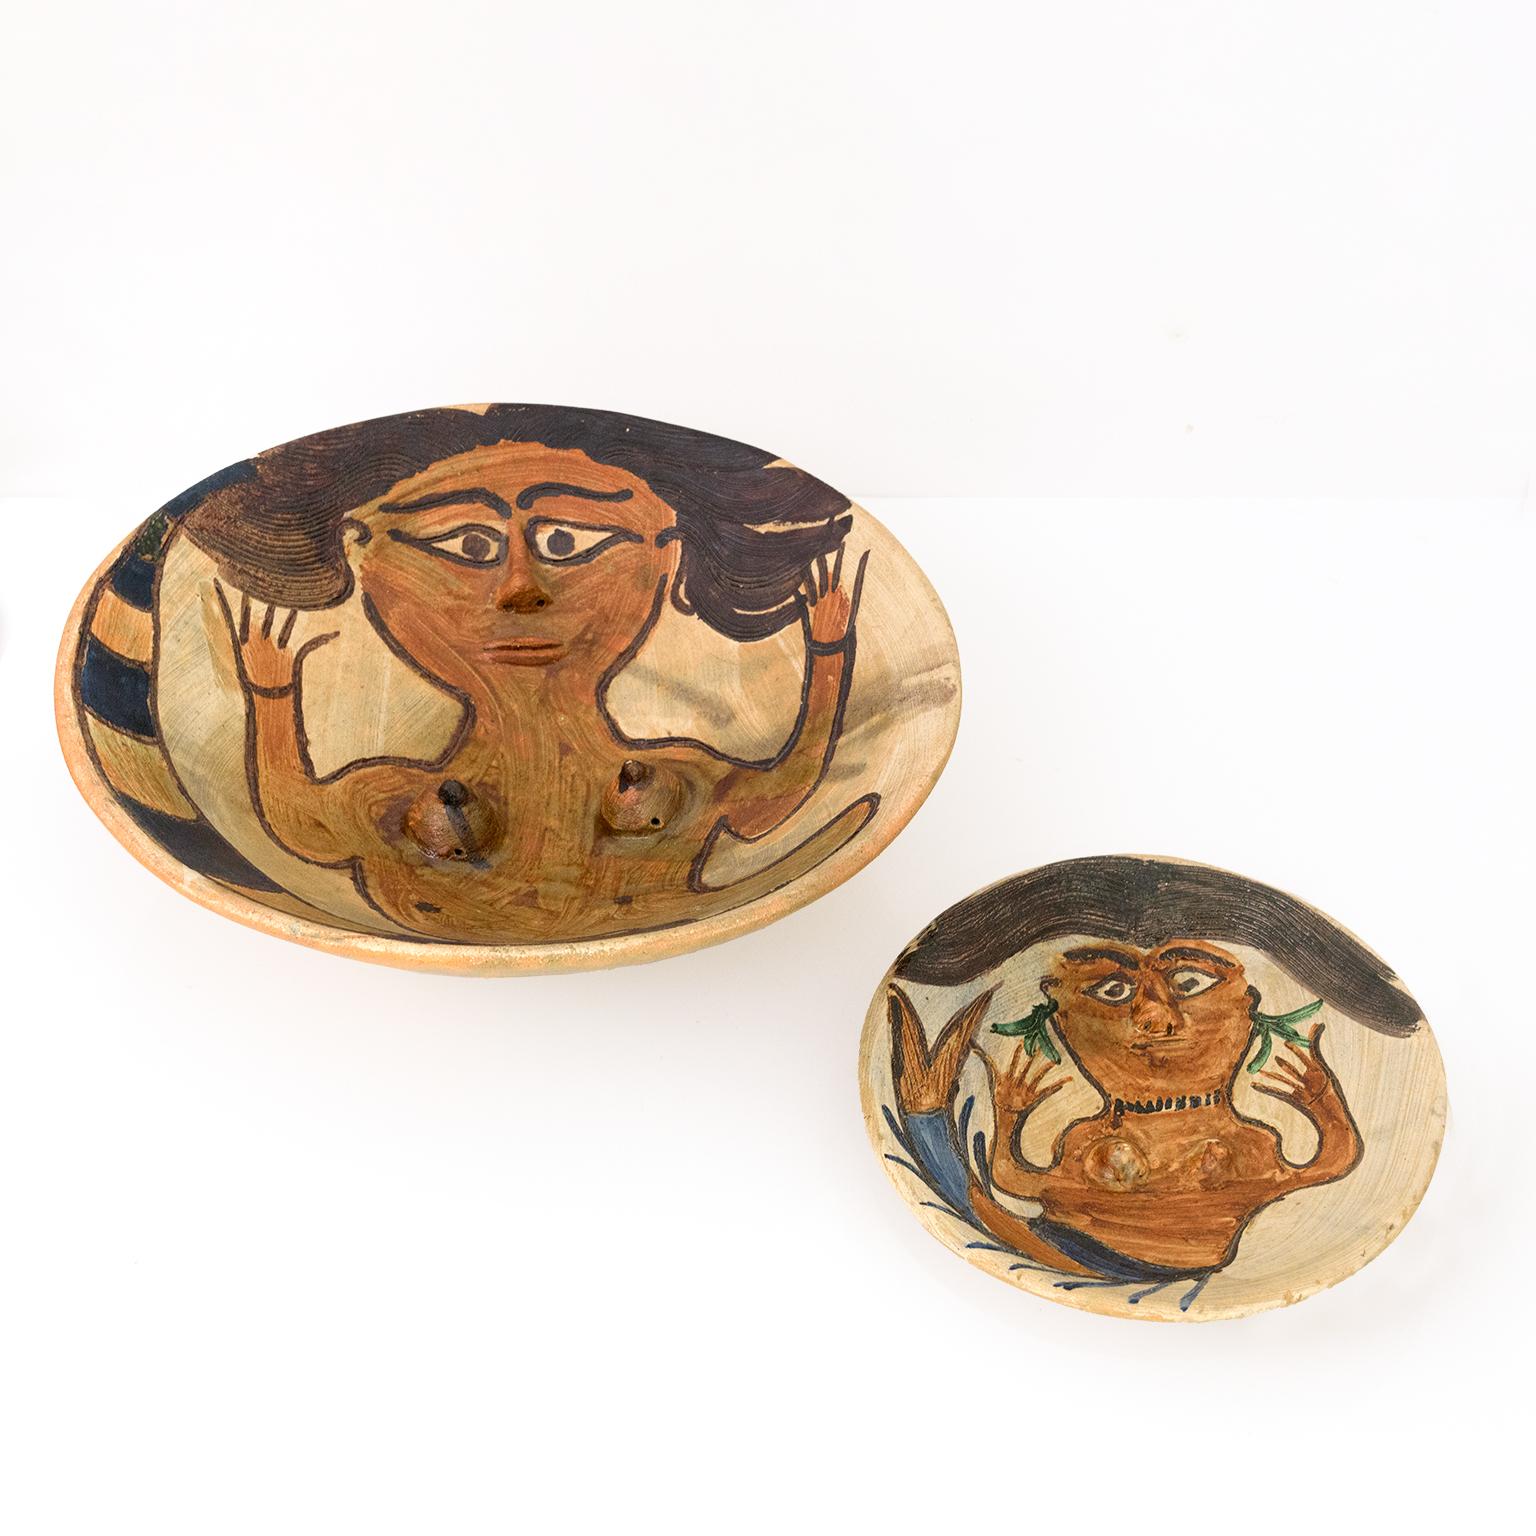 Two unique hand crafted clay bowls created by Dolores Porras. Polychrome glazed bas-relief each depicting mermaid with a nose and breast in high relief, the hands spread out next to the flowing hair, the tail bent next to the body, signed on the